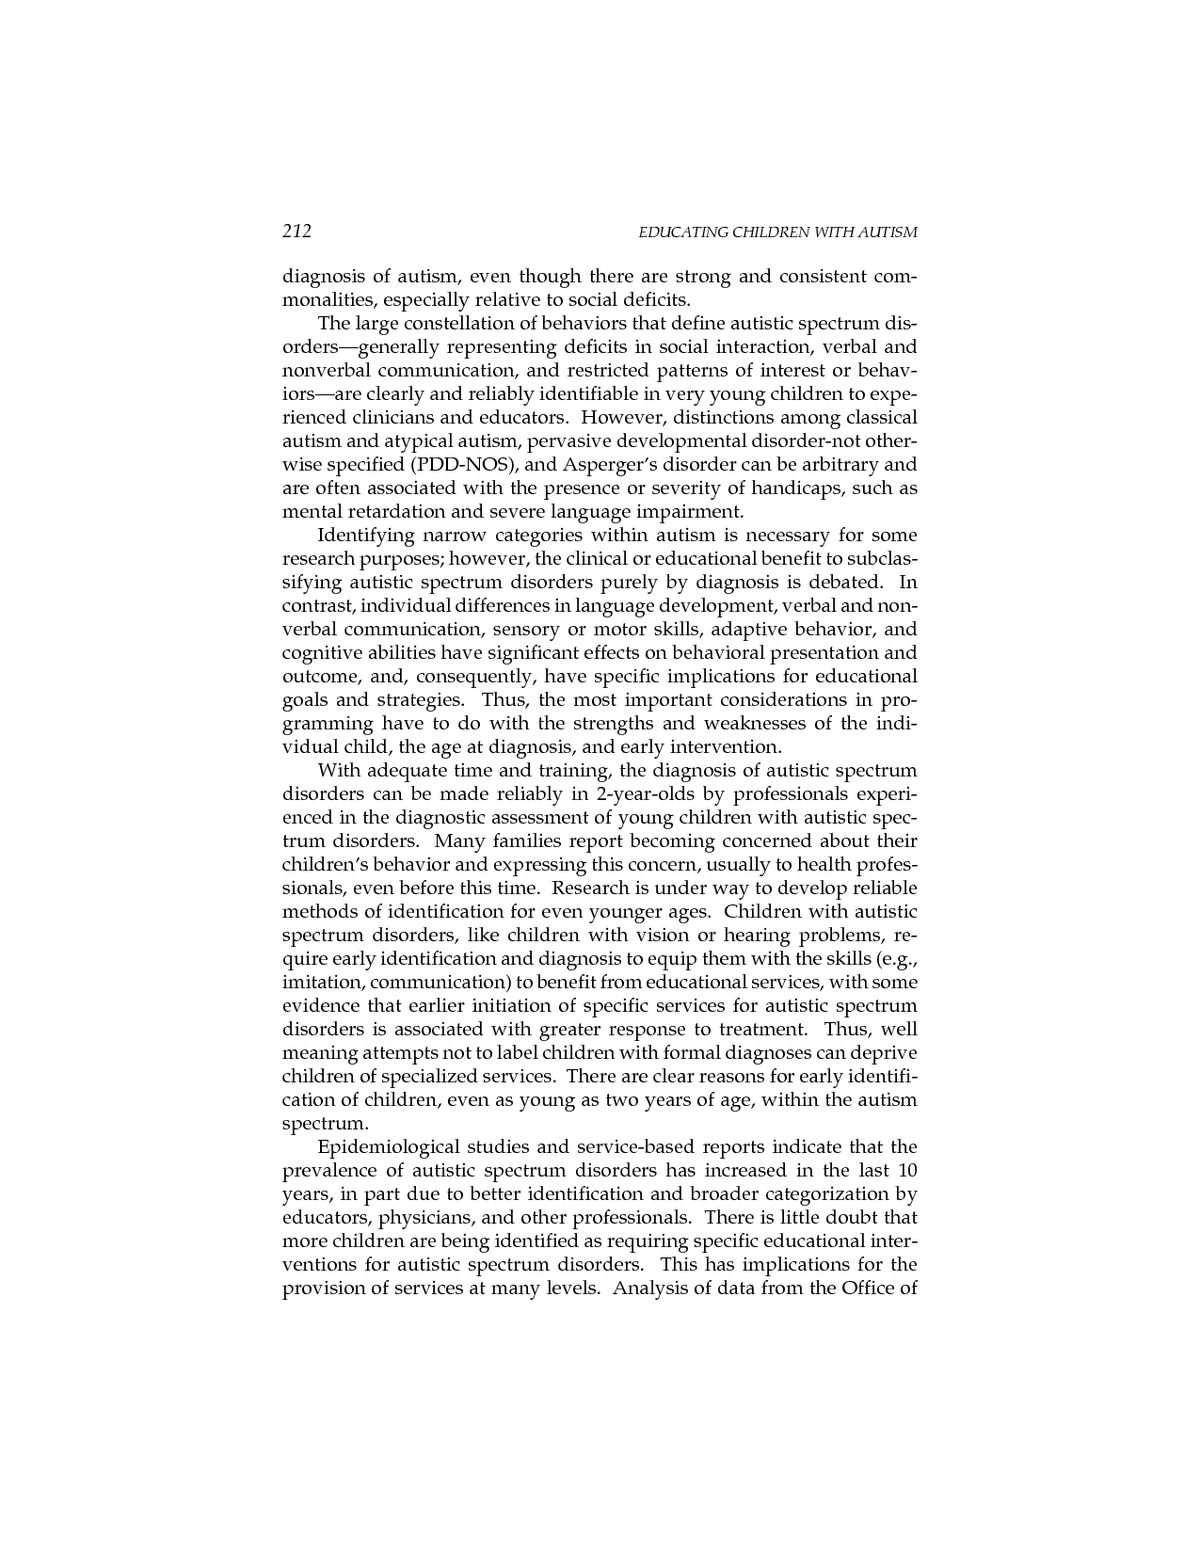 Реферат: Autism Essay Research Paper Autism Throughout the